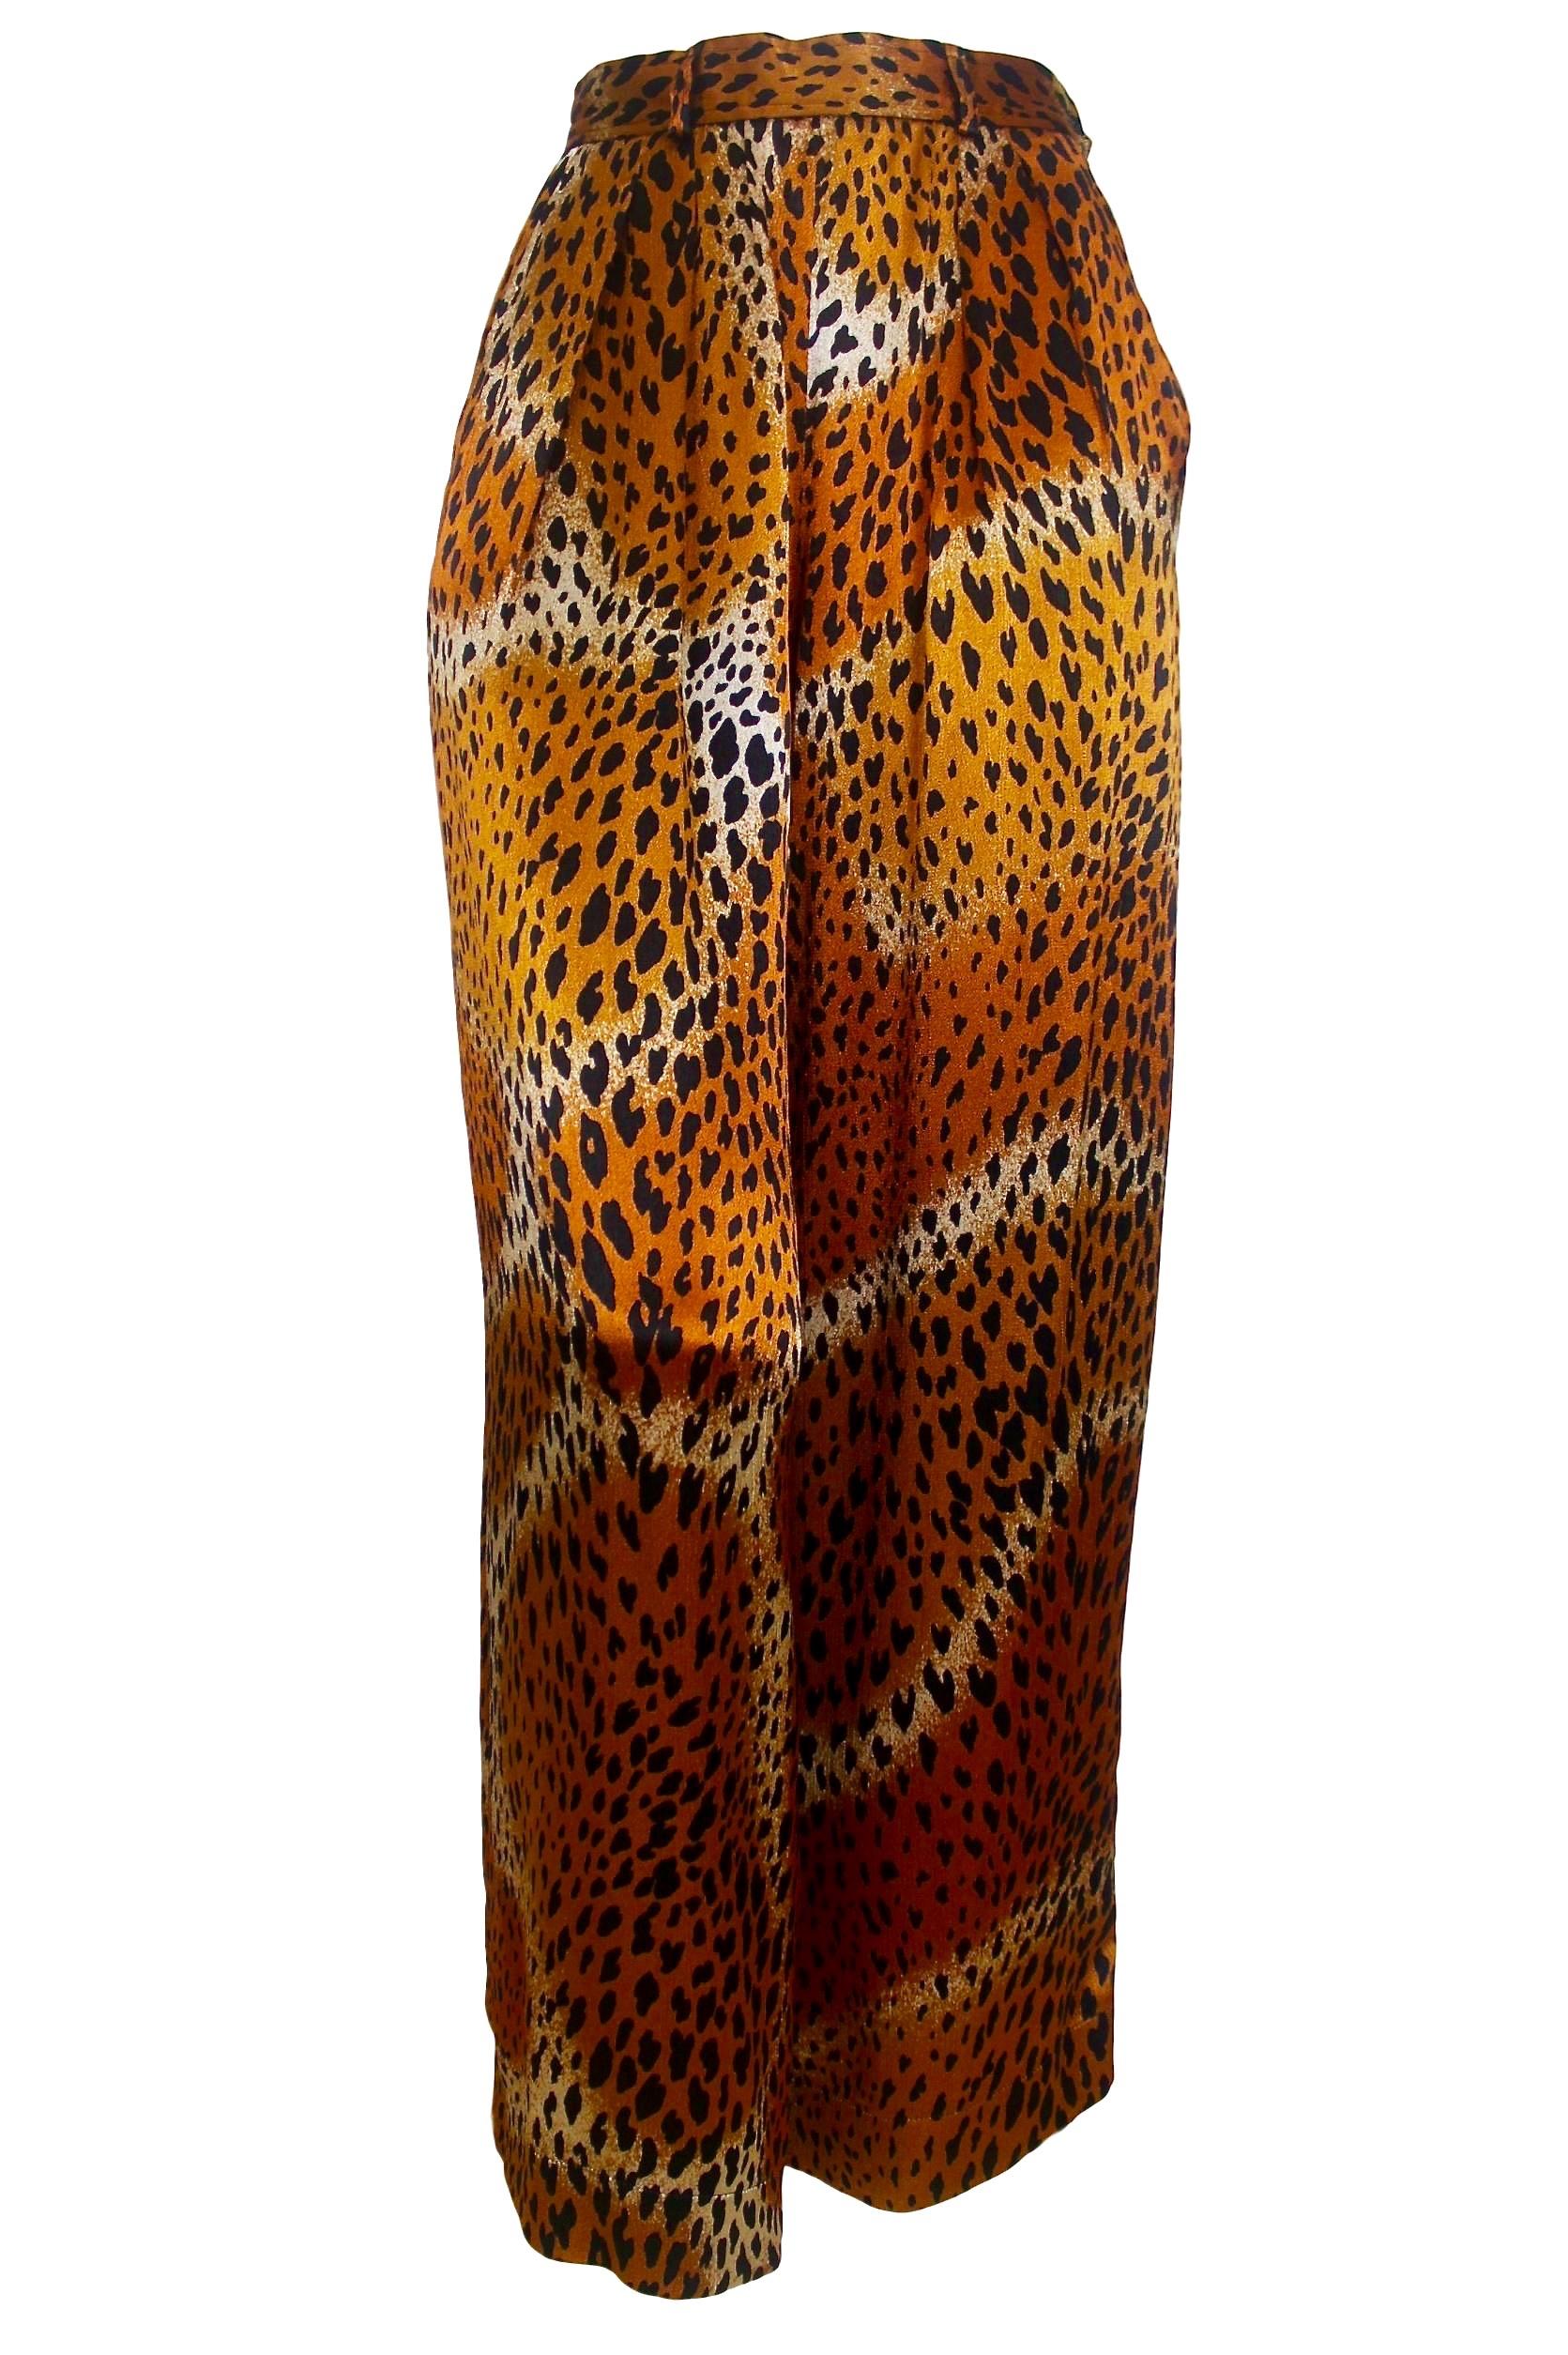 Yves Saint Laurent 1977 Leopard Print Camisole and Trousers For Sale 9